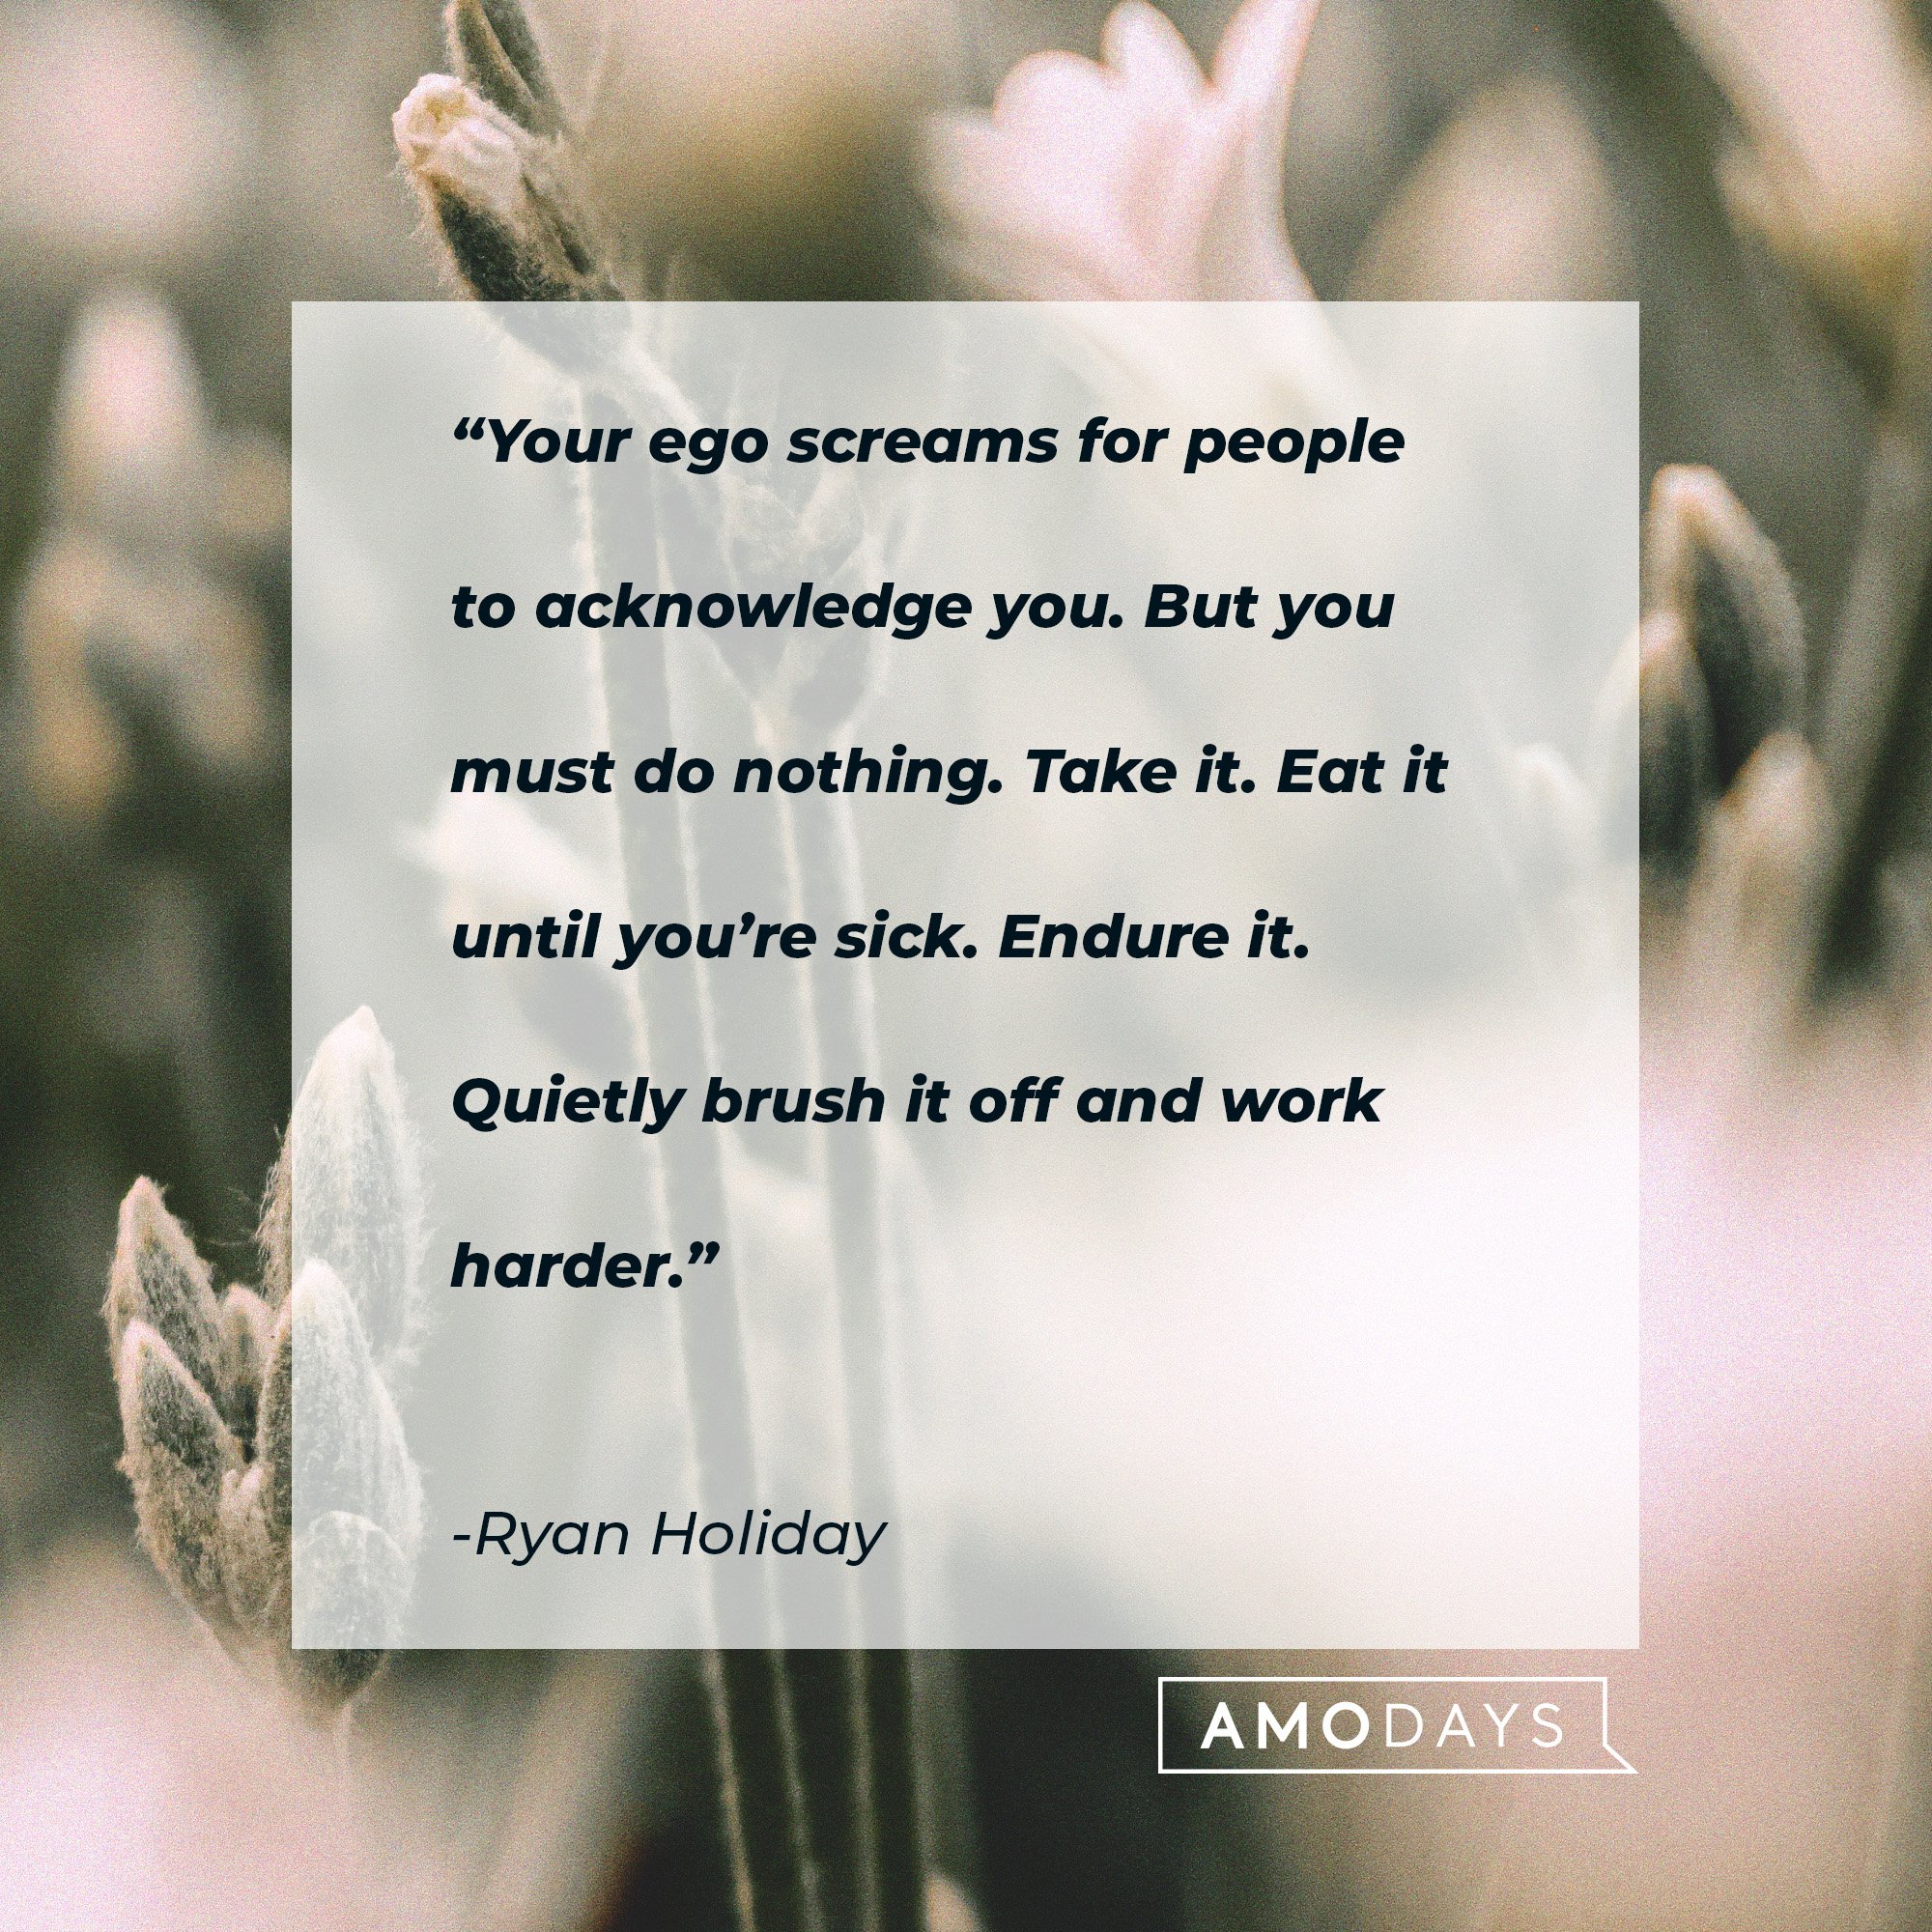 Ryan Holiday's quote: “Your ego screams for people to acknowledge you. But you must do nothing. Take it. Eat it until you’re sick. Endure it. Quietly brush it off and work harder.” | Image: AmoDays